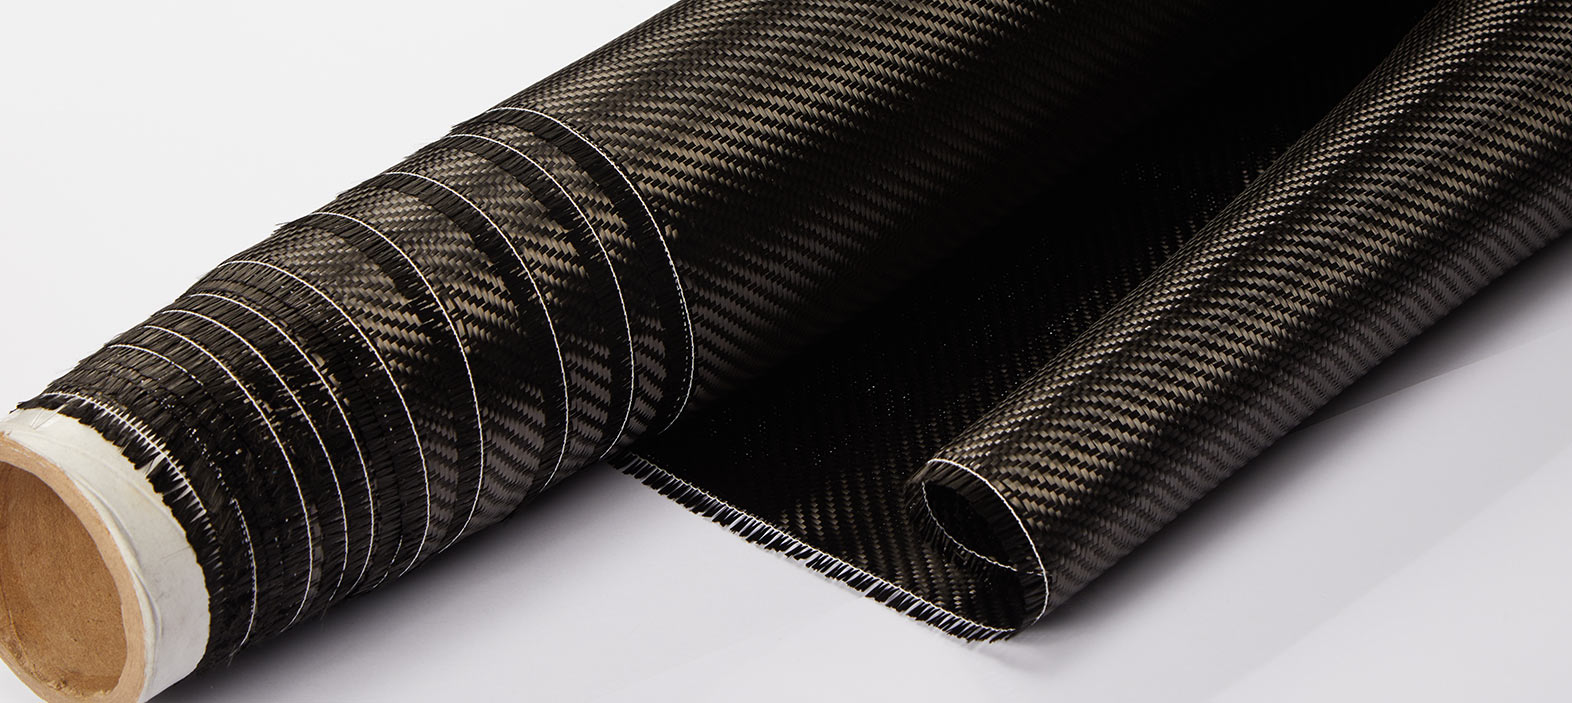 Why Epoxy Resin Is Used In Manufacturing Carbon Fiber Products?